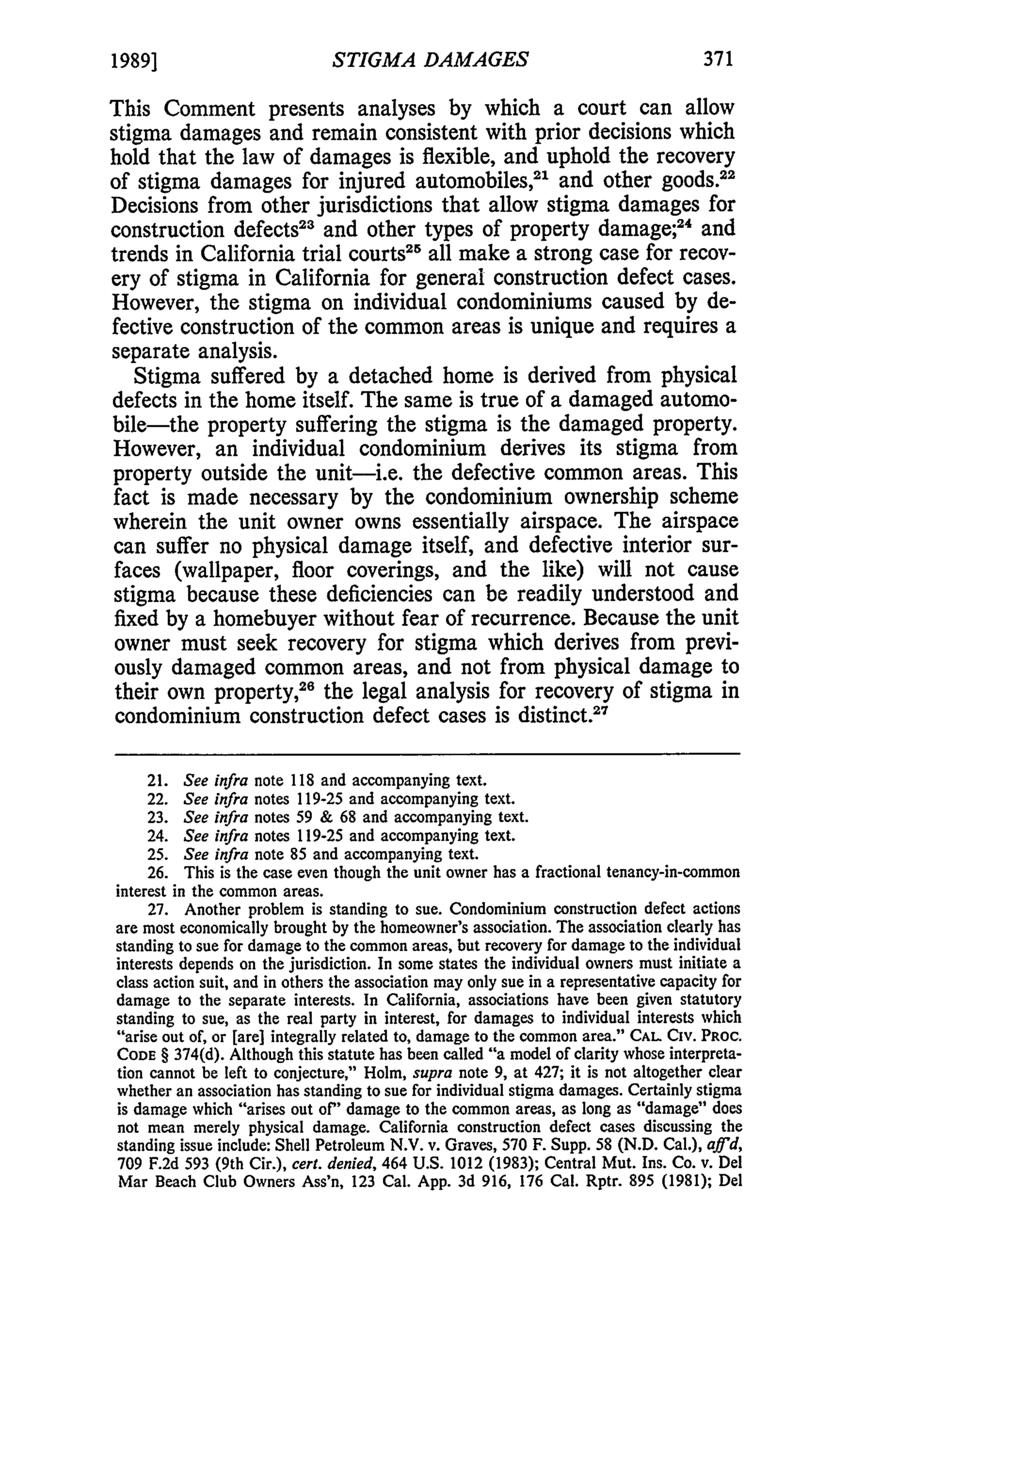 19891 Stott: Stigma Damages: The Case for Recovery in Condominium Constructio STIGMA DAMAGES This Comment presents analyses by which a court can allow stigma damages and remain consistent with prior